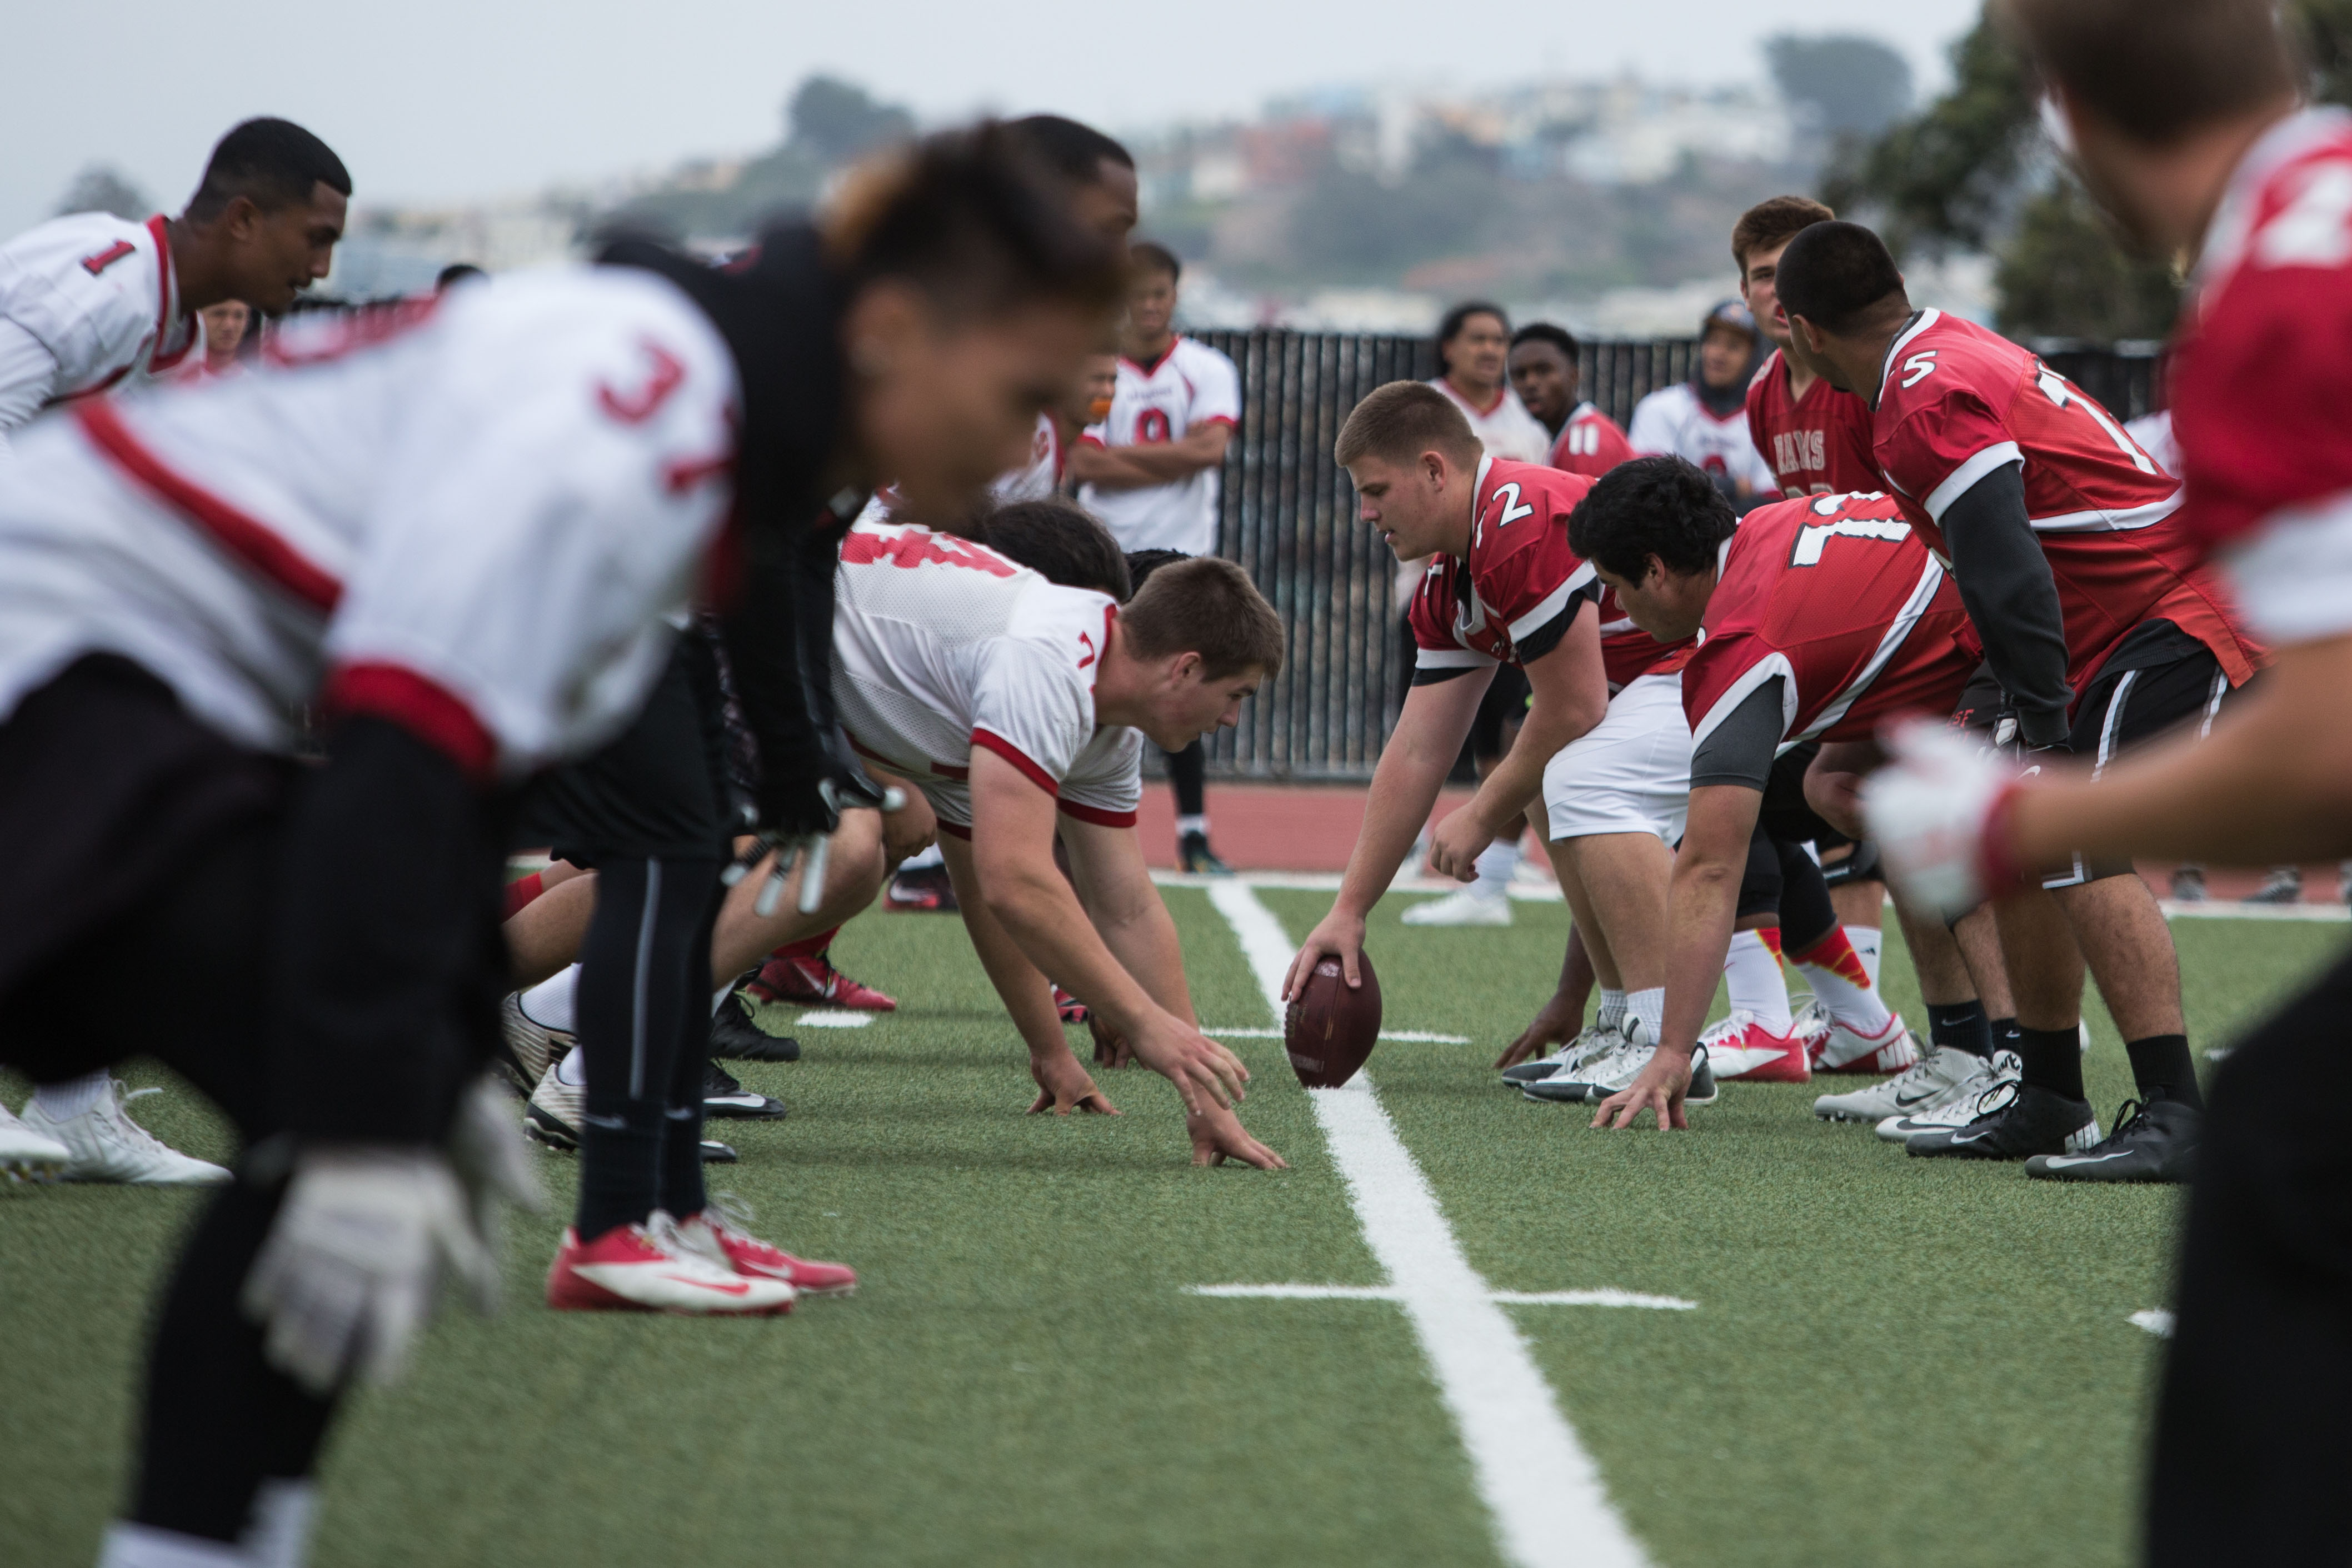 The Rams practice for their upcoming football season at rams stadium on August 10. (Photo by Khaled Sayed)